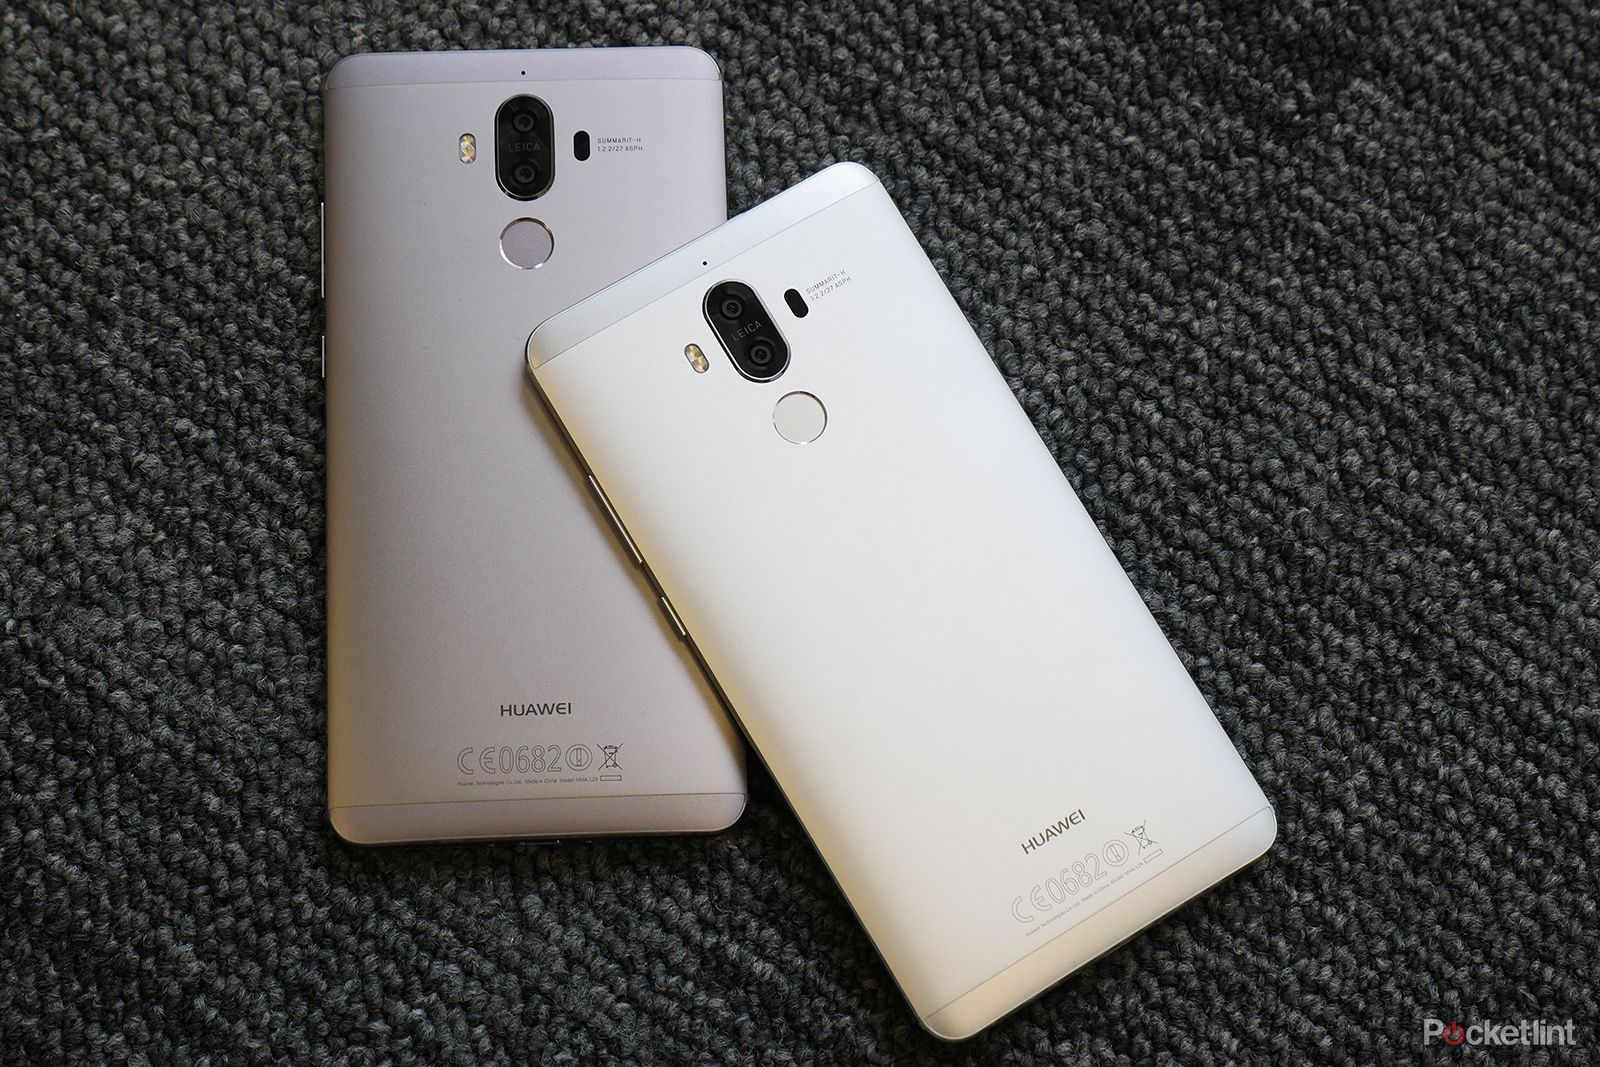 Huawei confirms Mate 10 will sport mammoth 4000mAh battery image 1